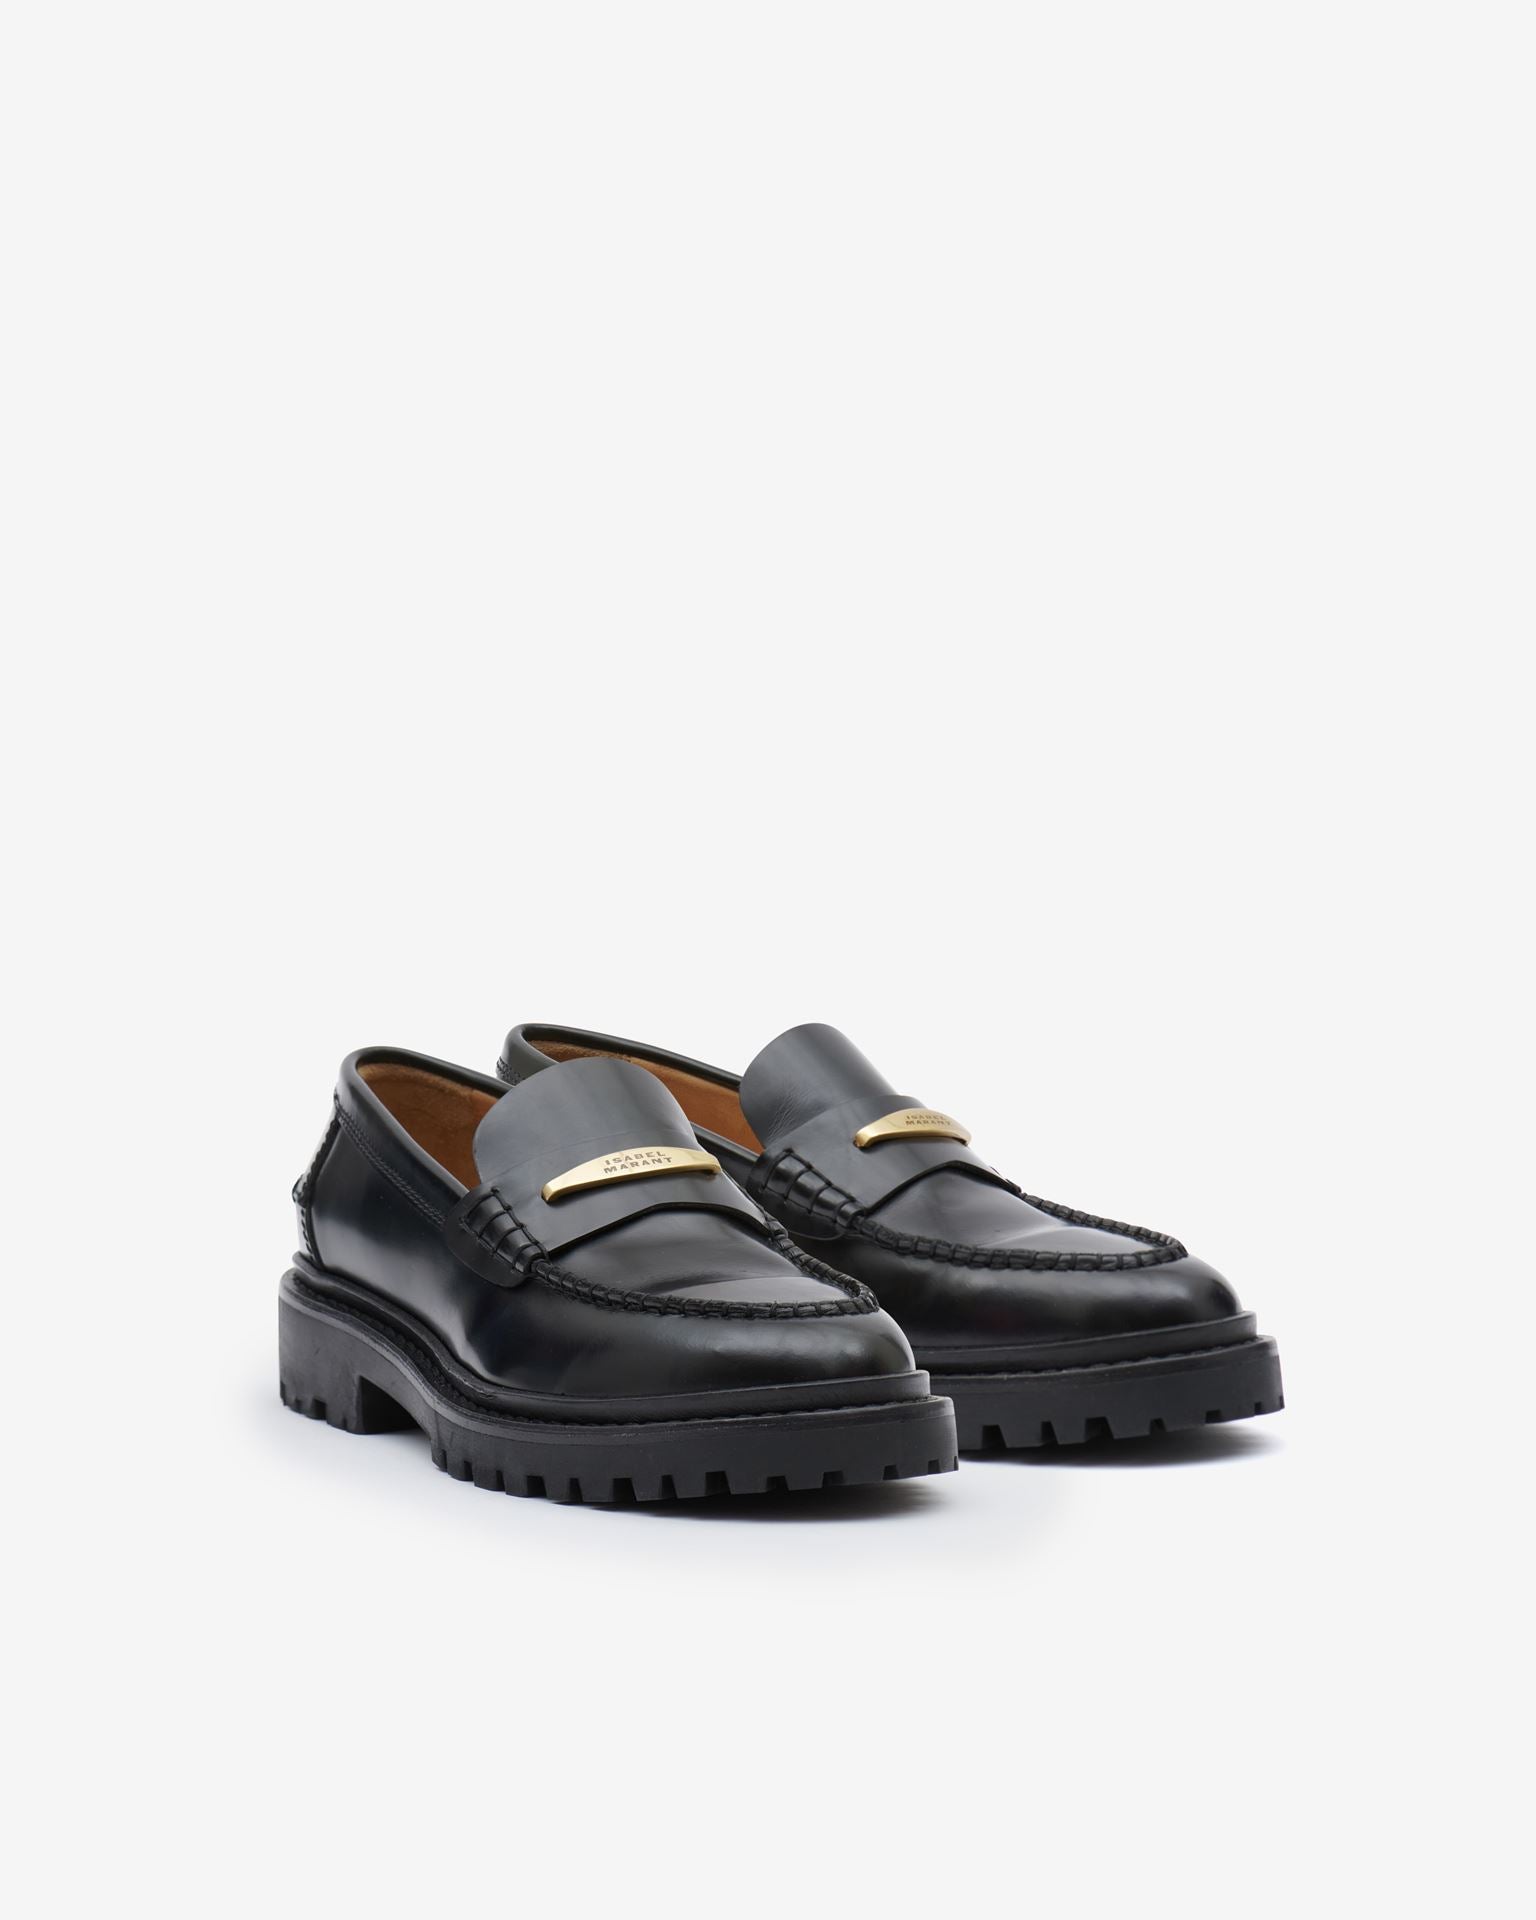 Isabel Marant Frezza Loafer-footwear-Misch-Vancouver-Canada